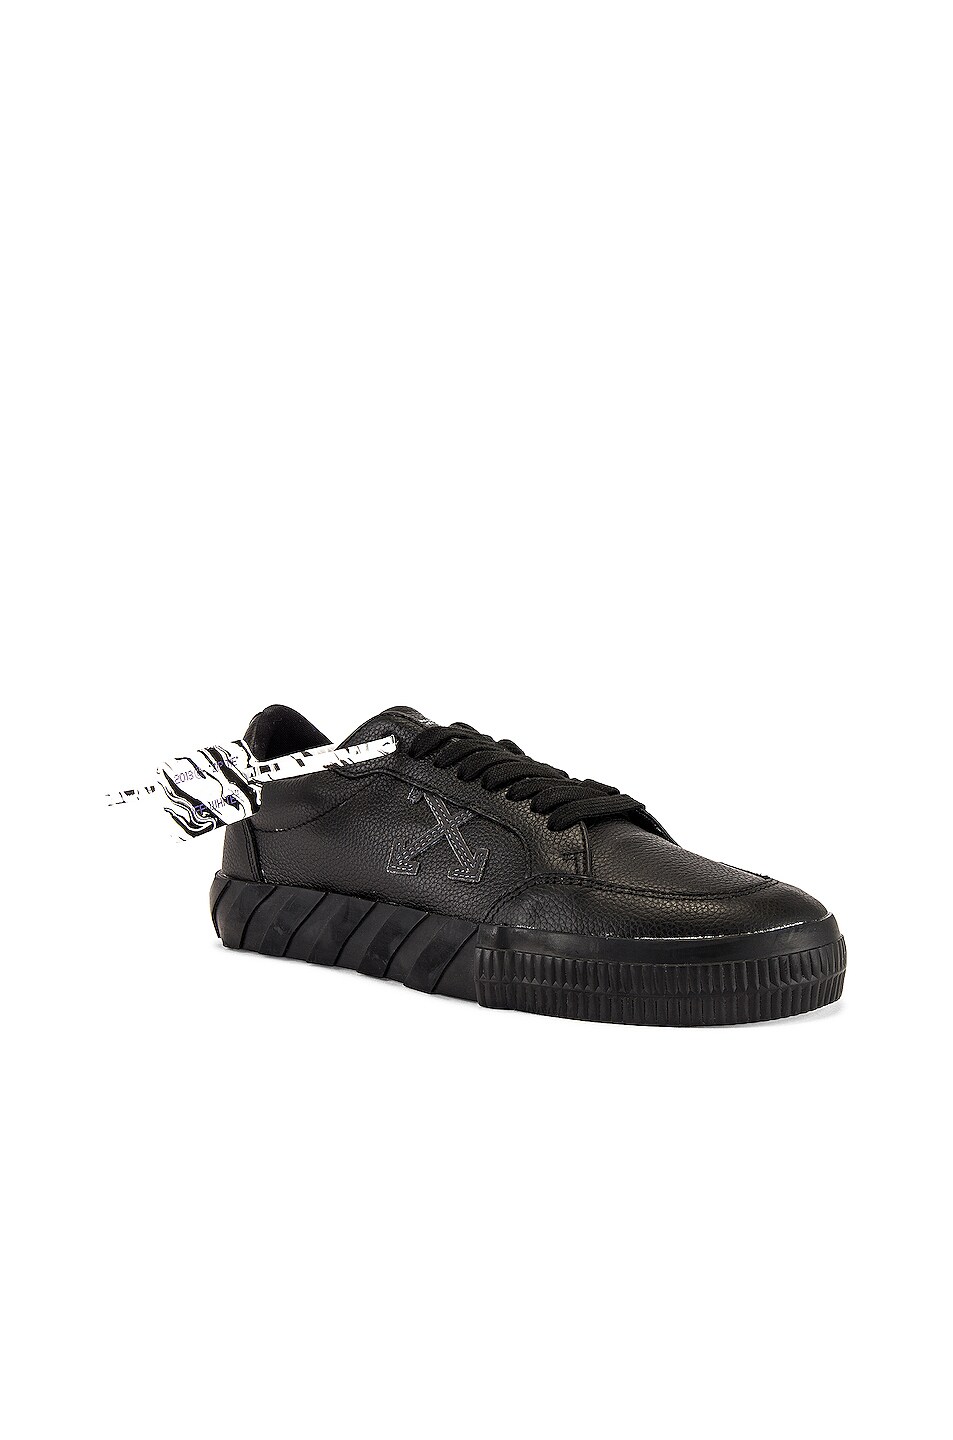 Image 1 of OFF-WHITE Low Vulcanized Sneaker in Leather Black Iridescent